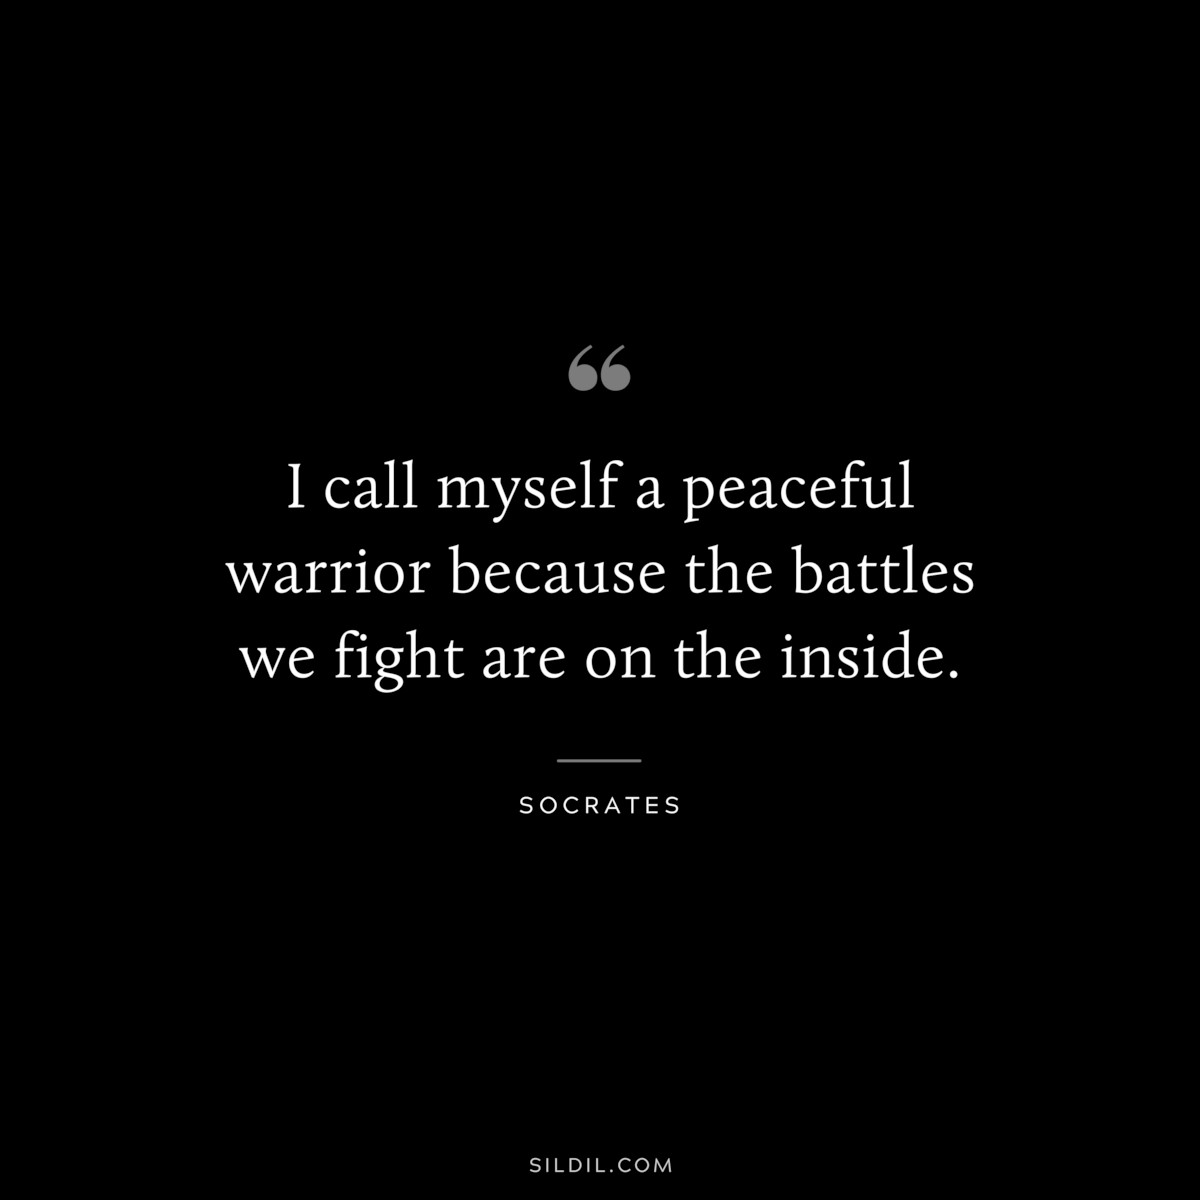 I call myself a peaceful warrior because the battles we fight are on the inside. ― Socrates